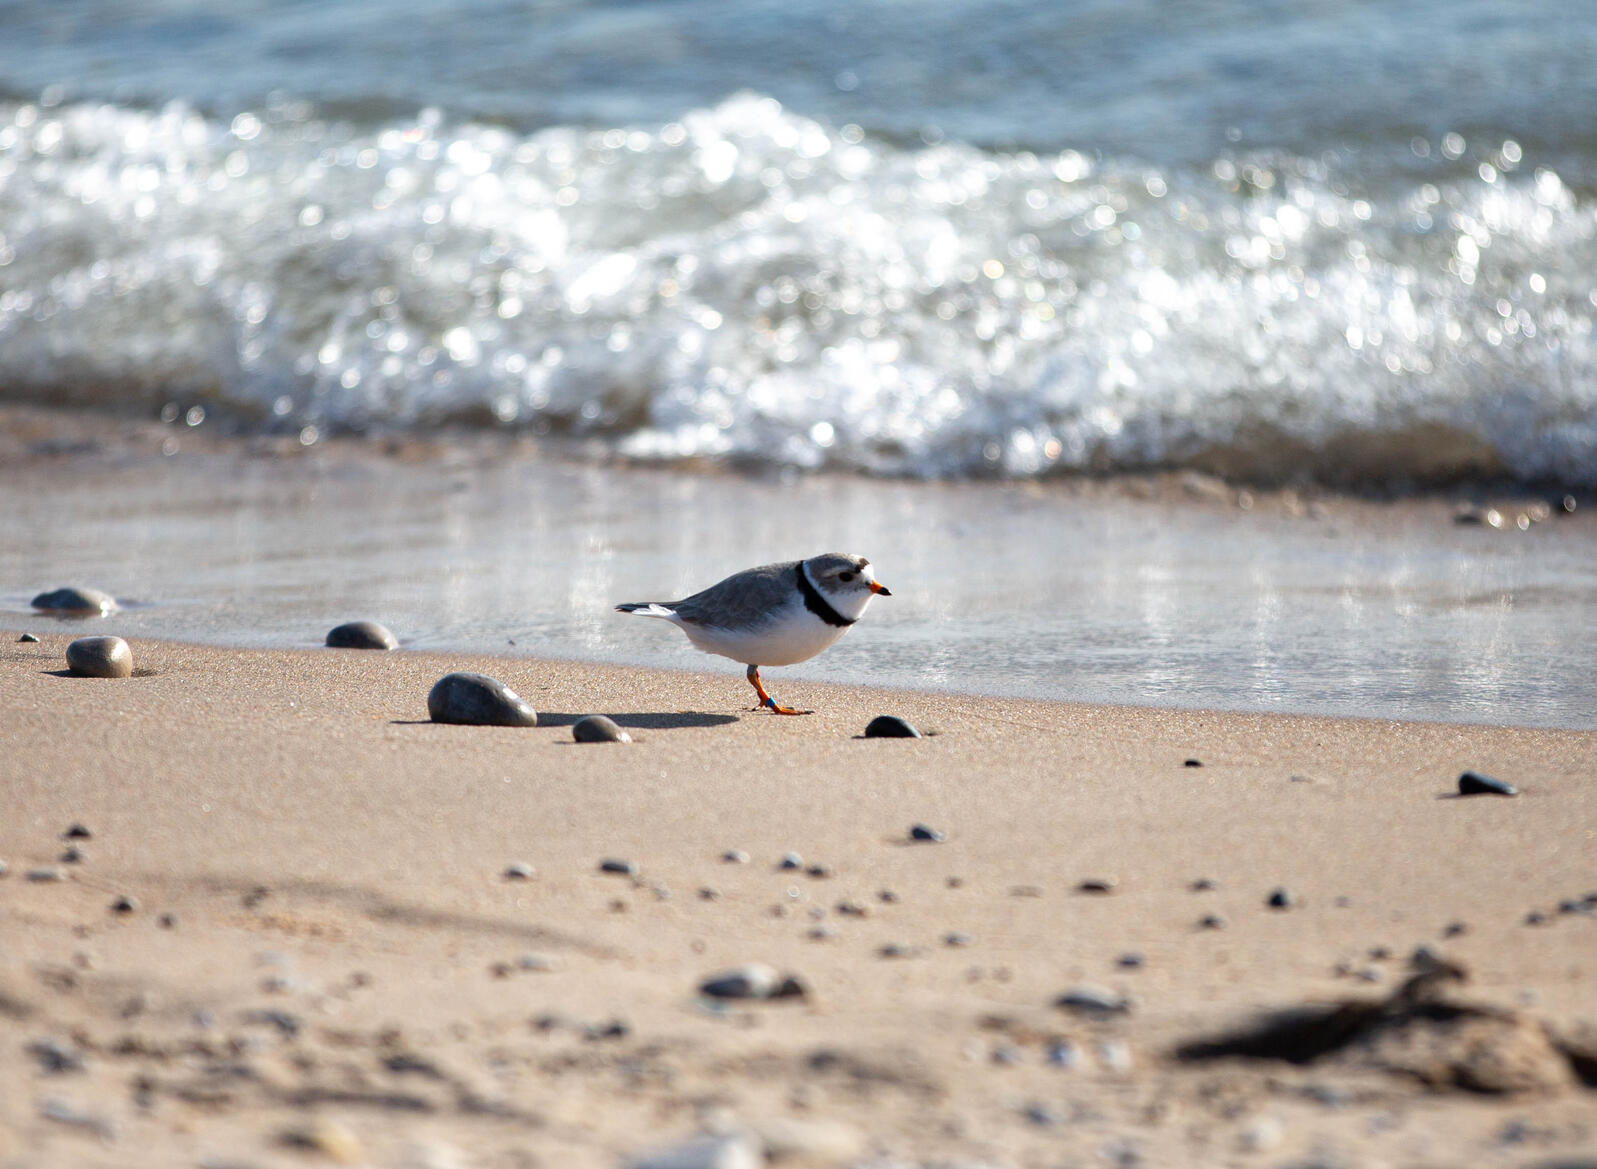 Great Lakes Piping Plover at Platte Point in Michigan 